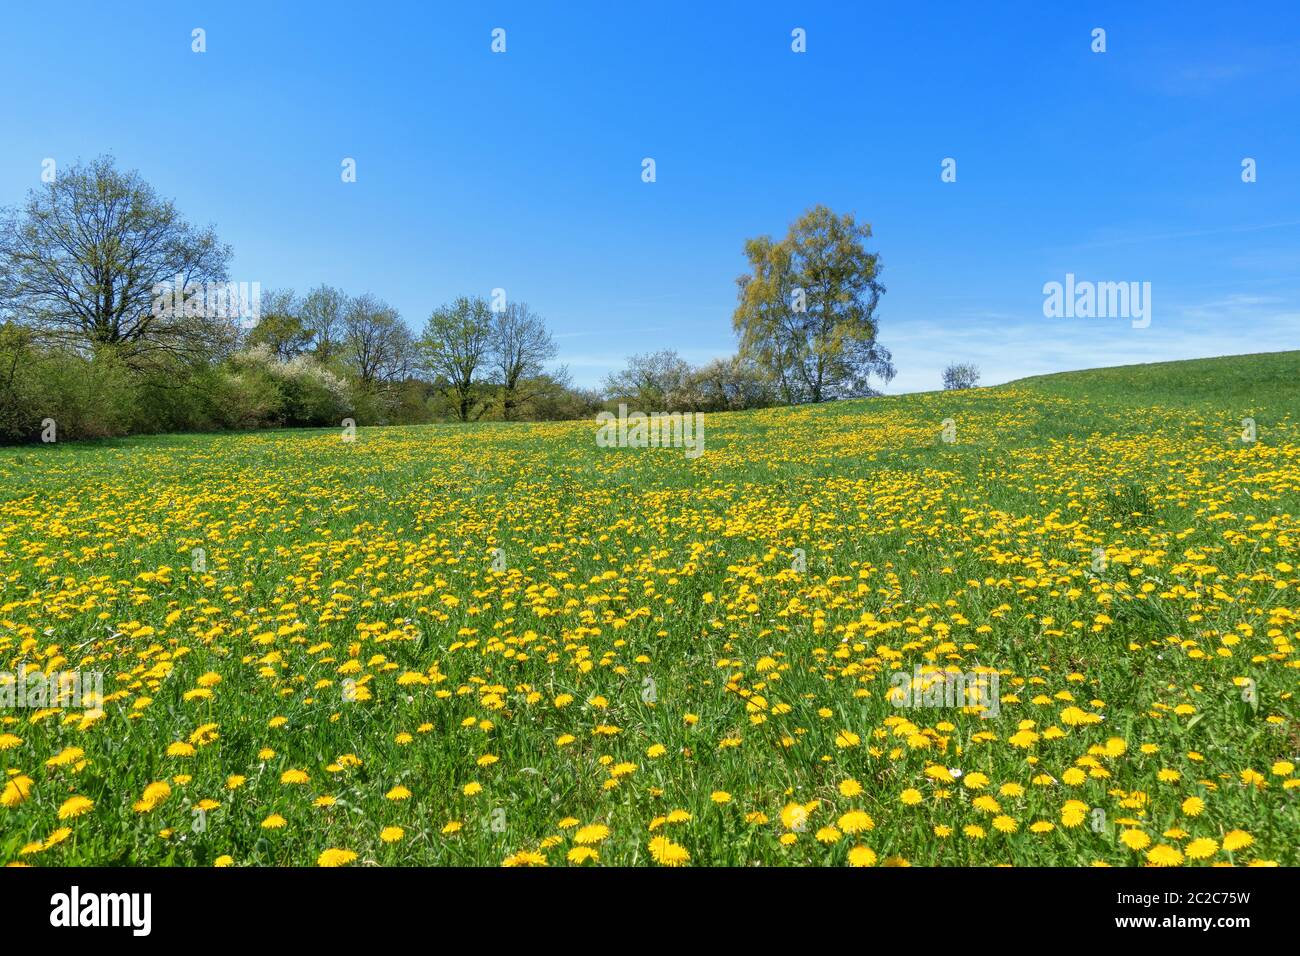 Idyllic flower meadow with yellow blooming dandelion in front of row of trees and bushes in spring Stock Photo